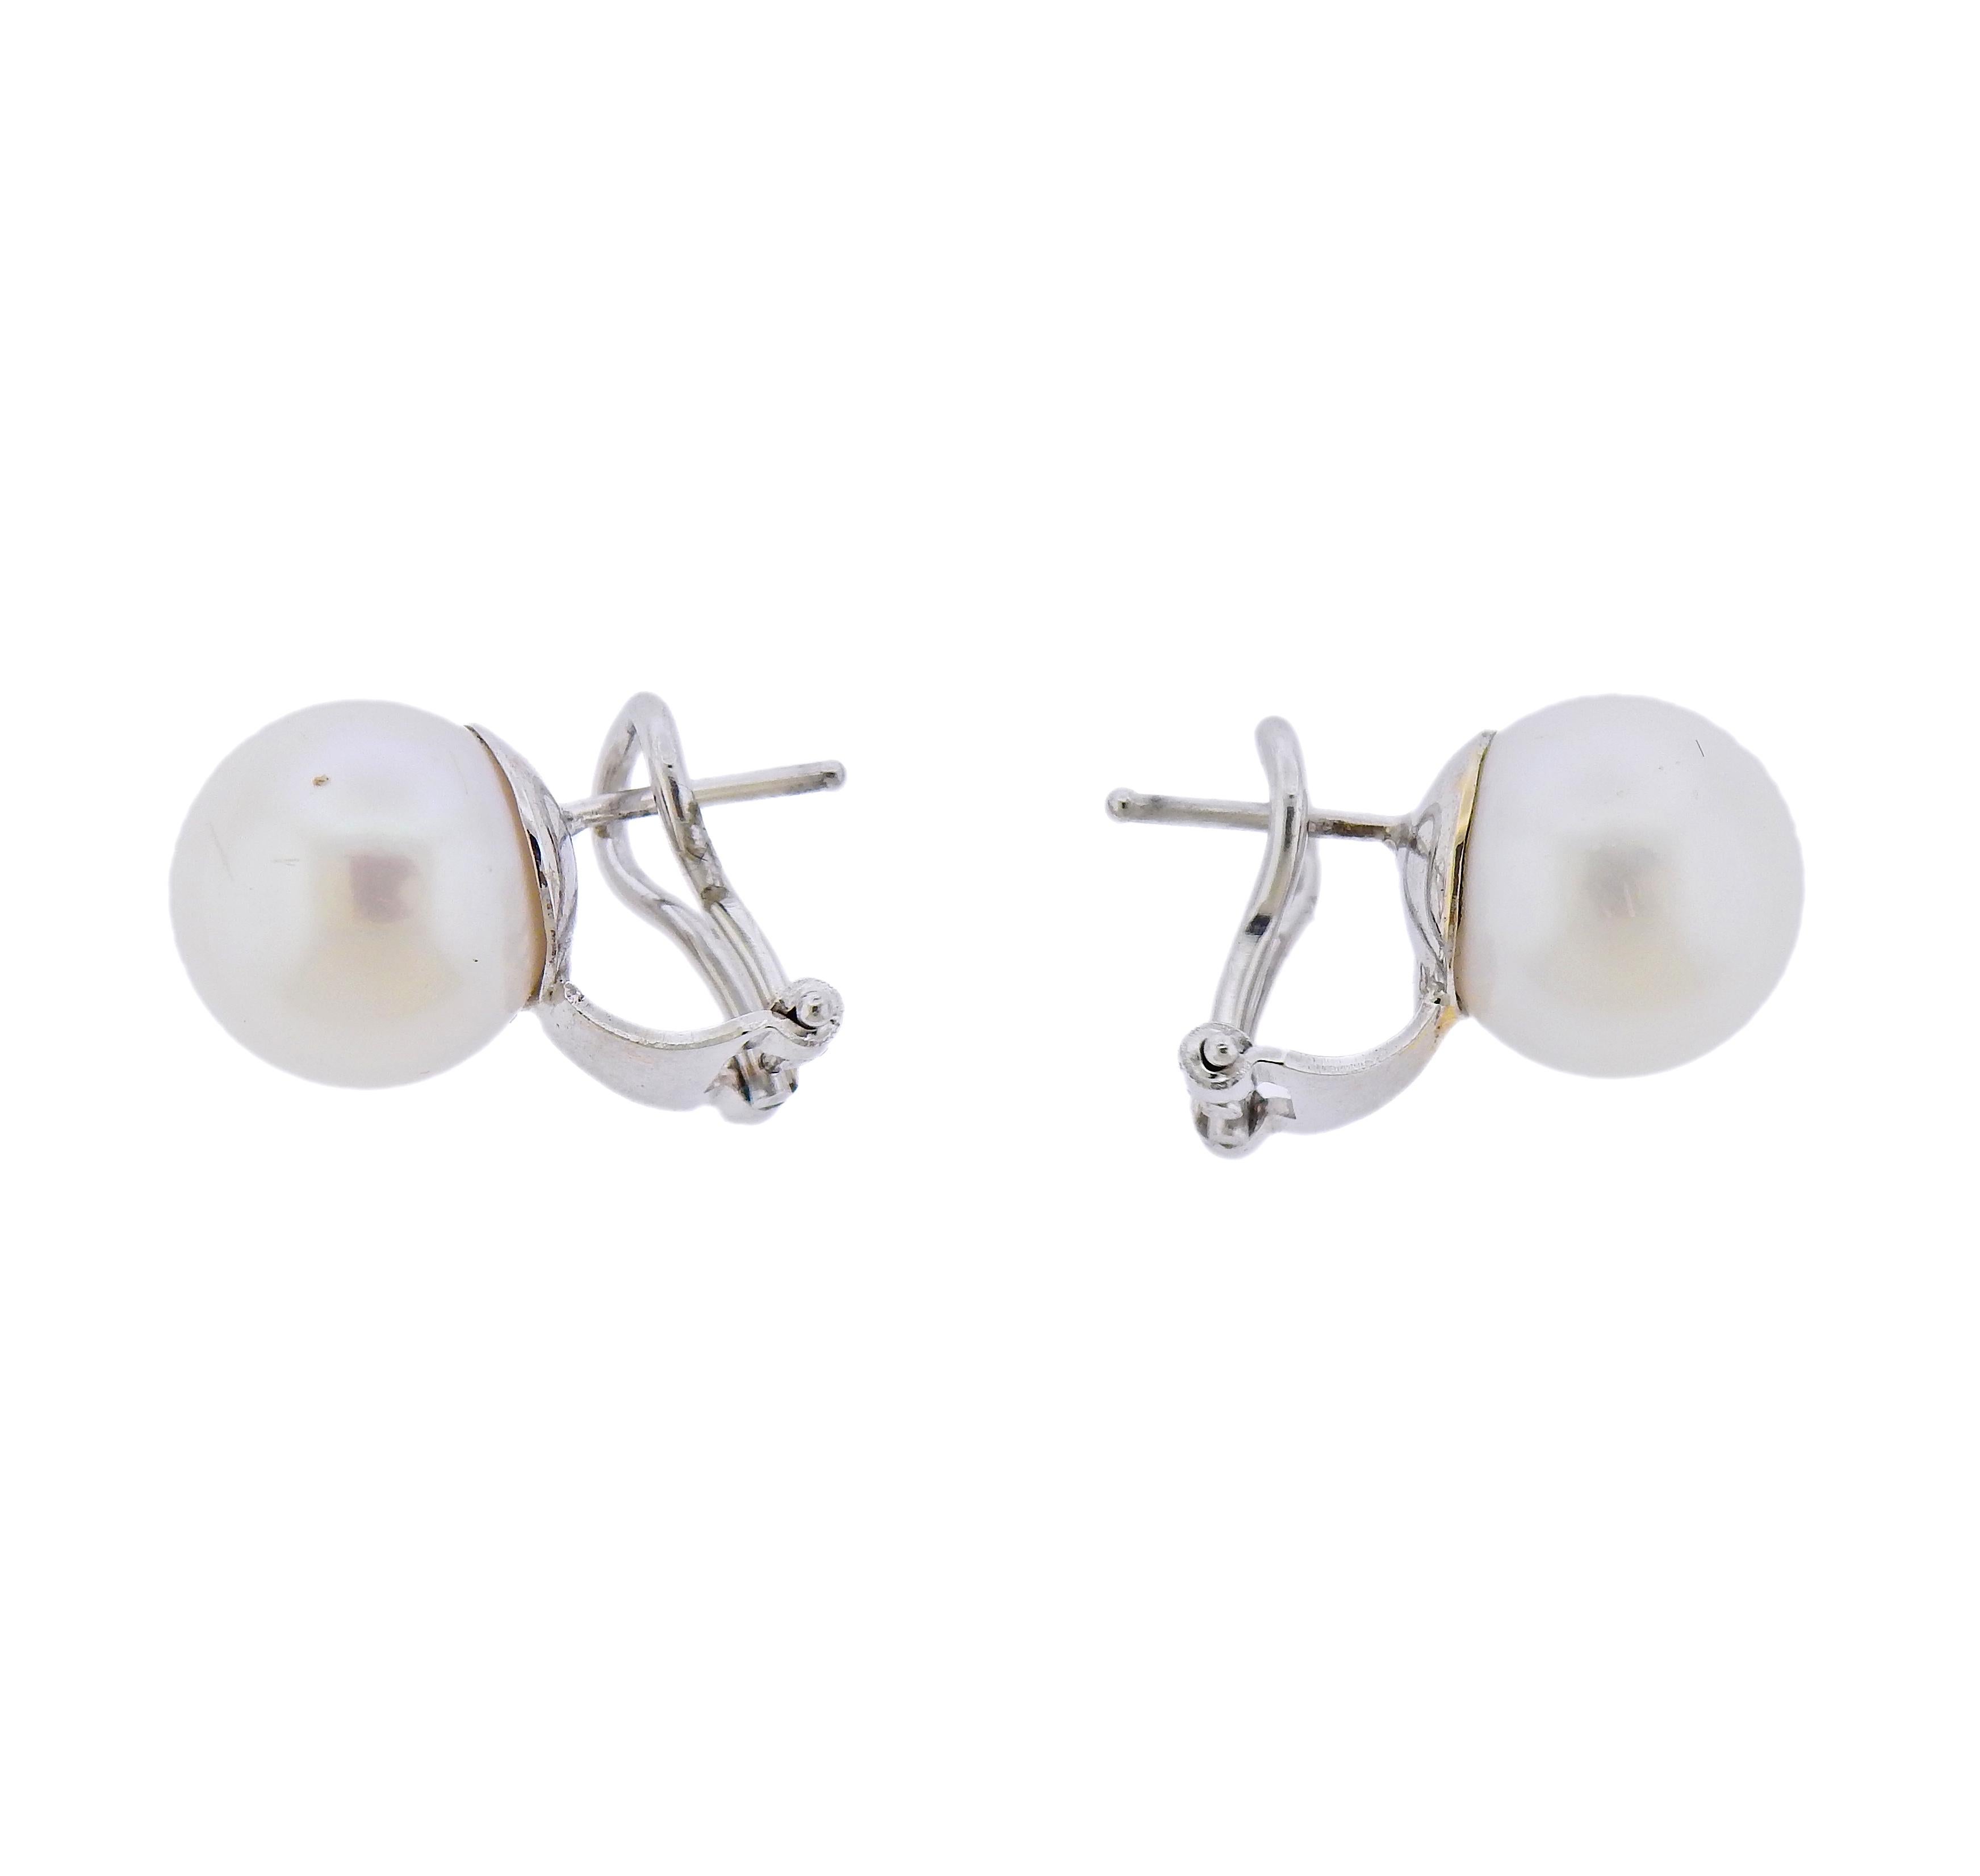 South Sea Pearl Gold Earrings In Excellent Condition For Sale In New York, NY